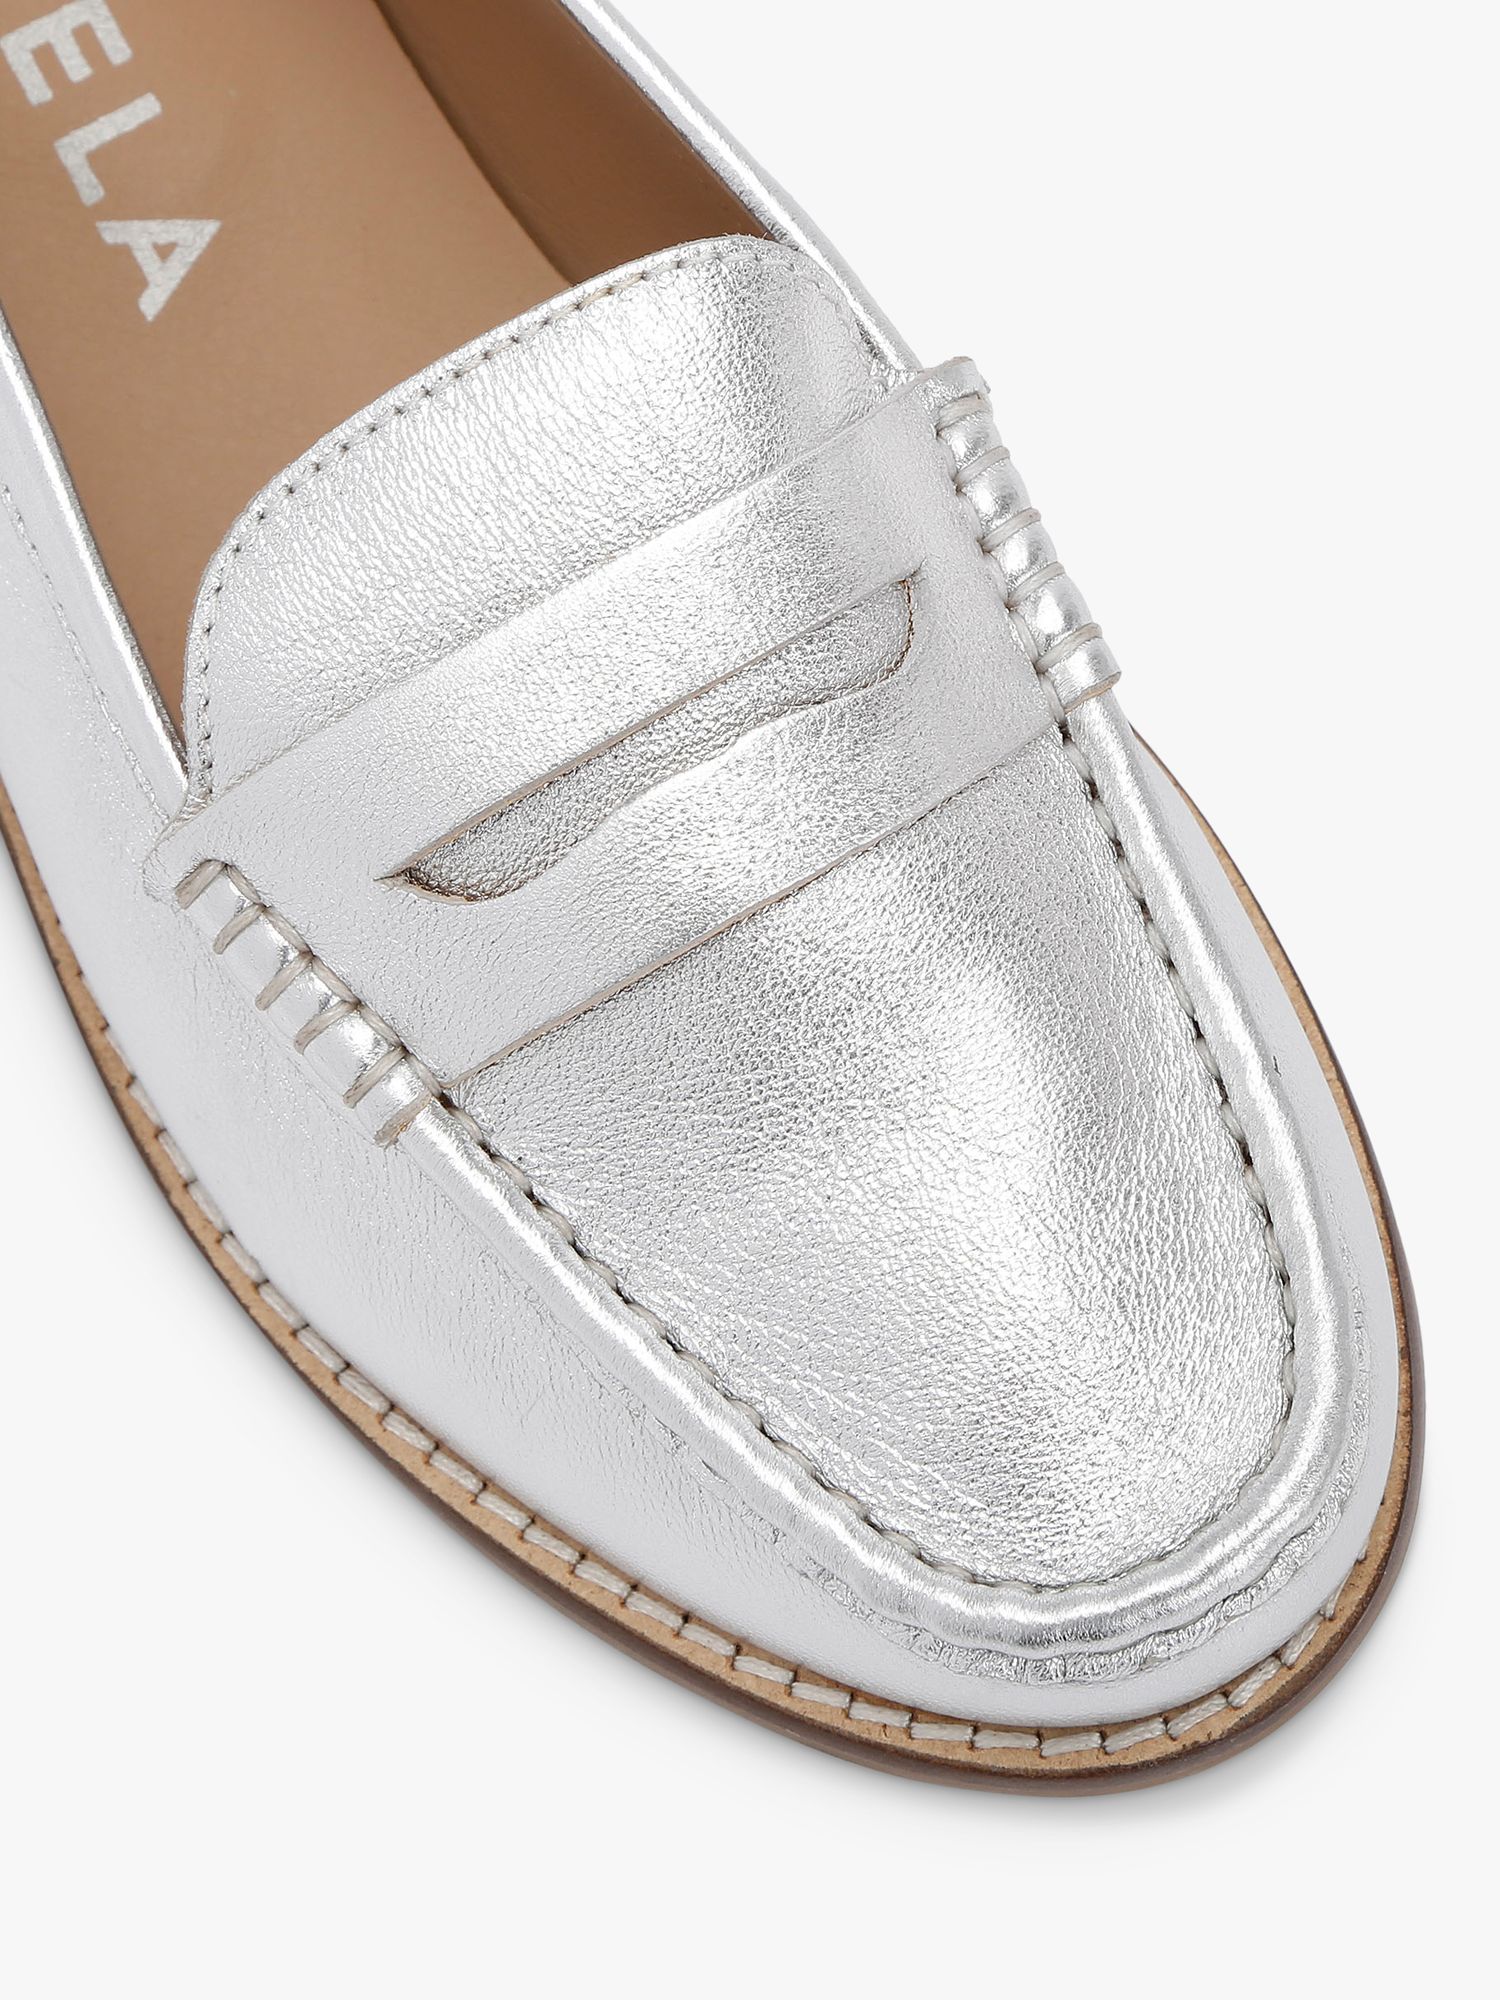 Carvela Crackle Metallic Leather Loafers, Silver, 3